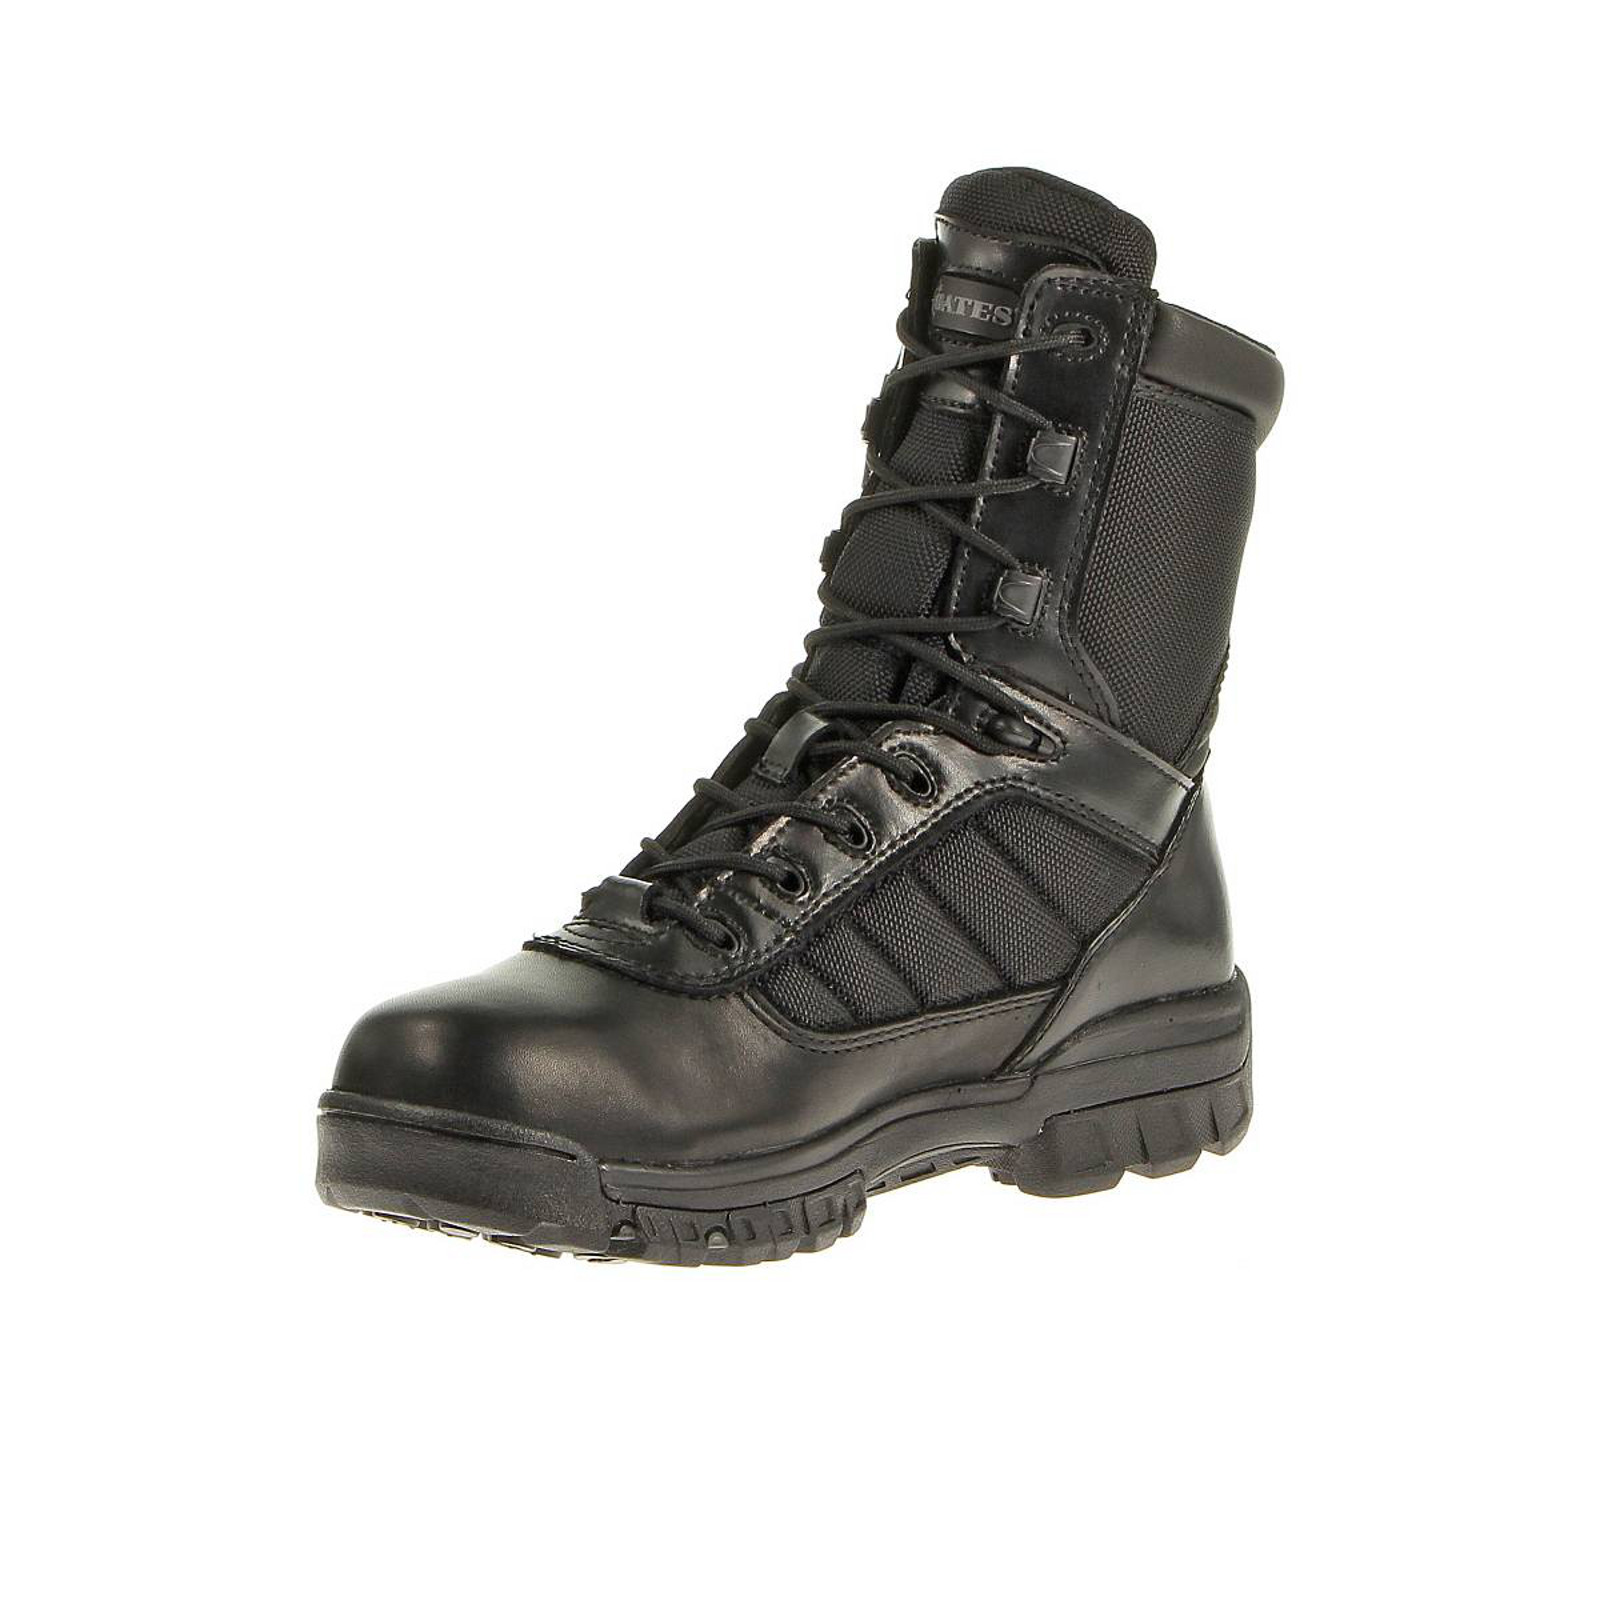 Men's Boots Ultra Lites Water Resistant Black E02280 Wide Avail